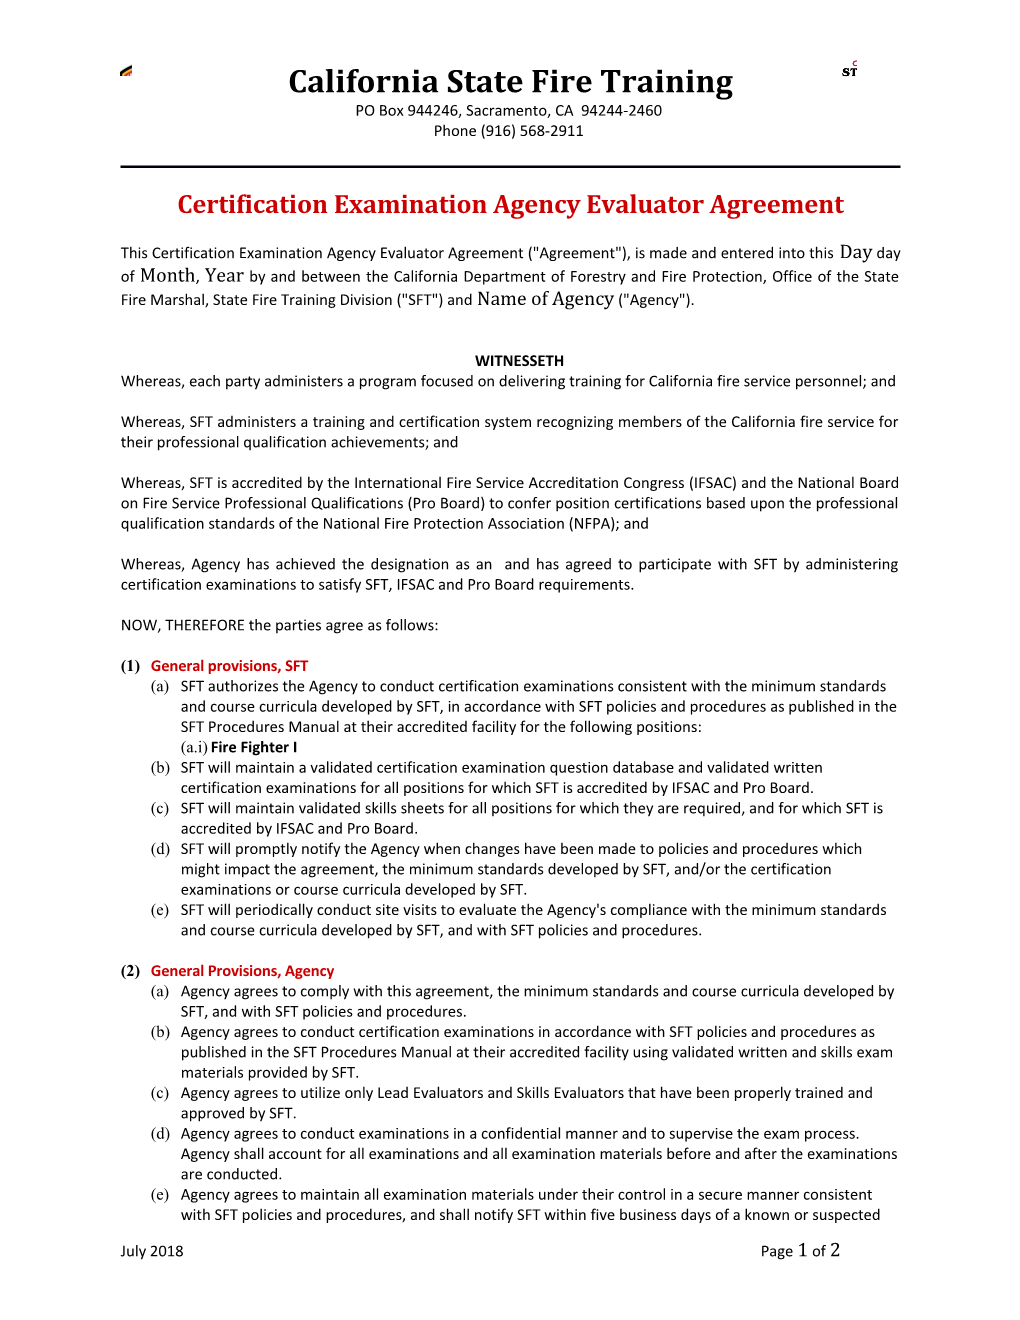 Certification Examination Agency Evaluator Agreement